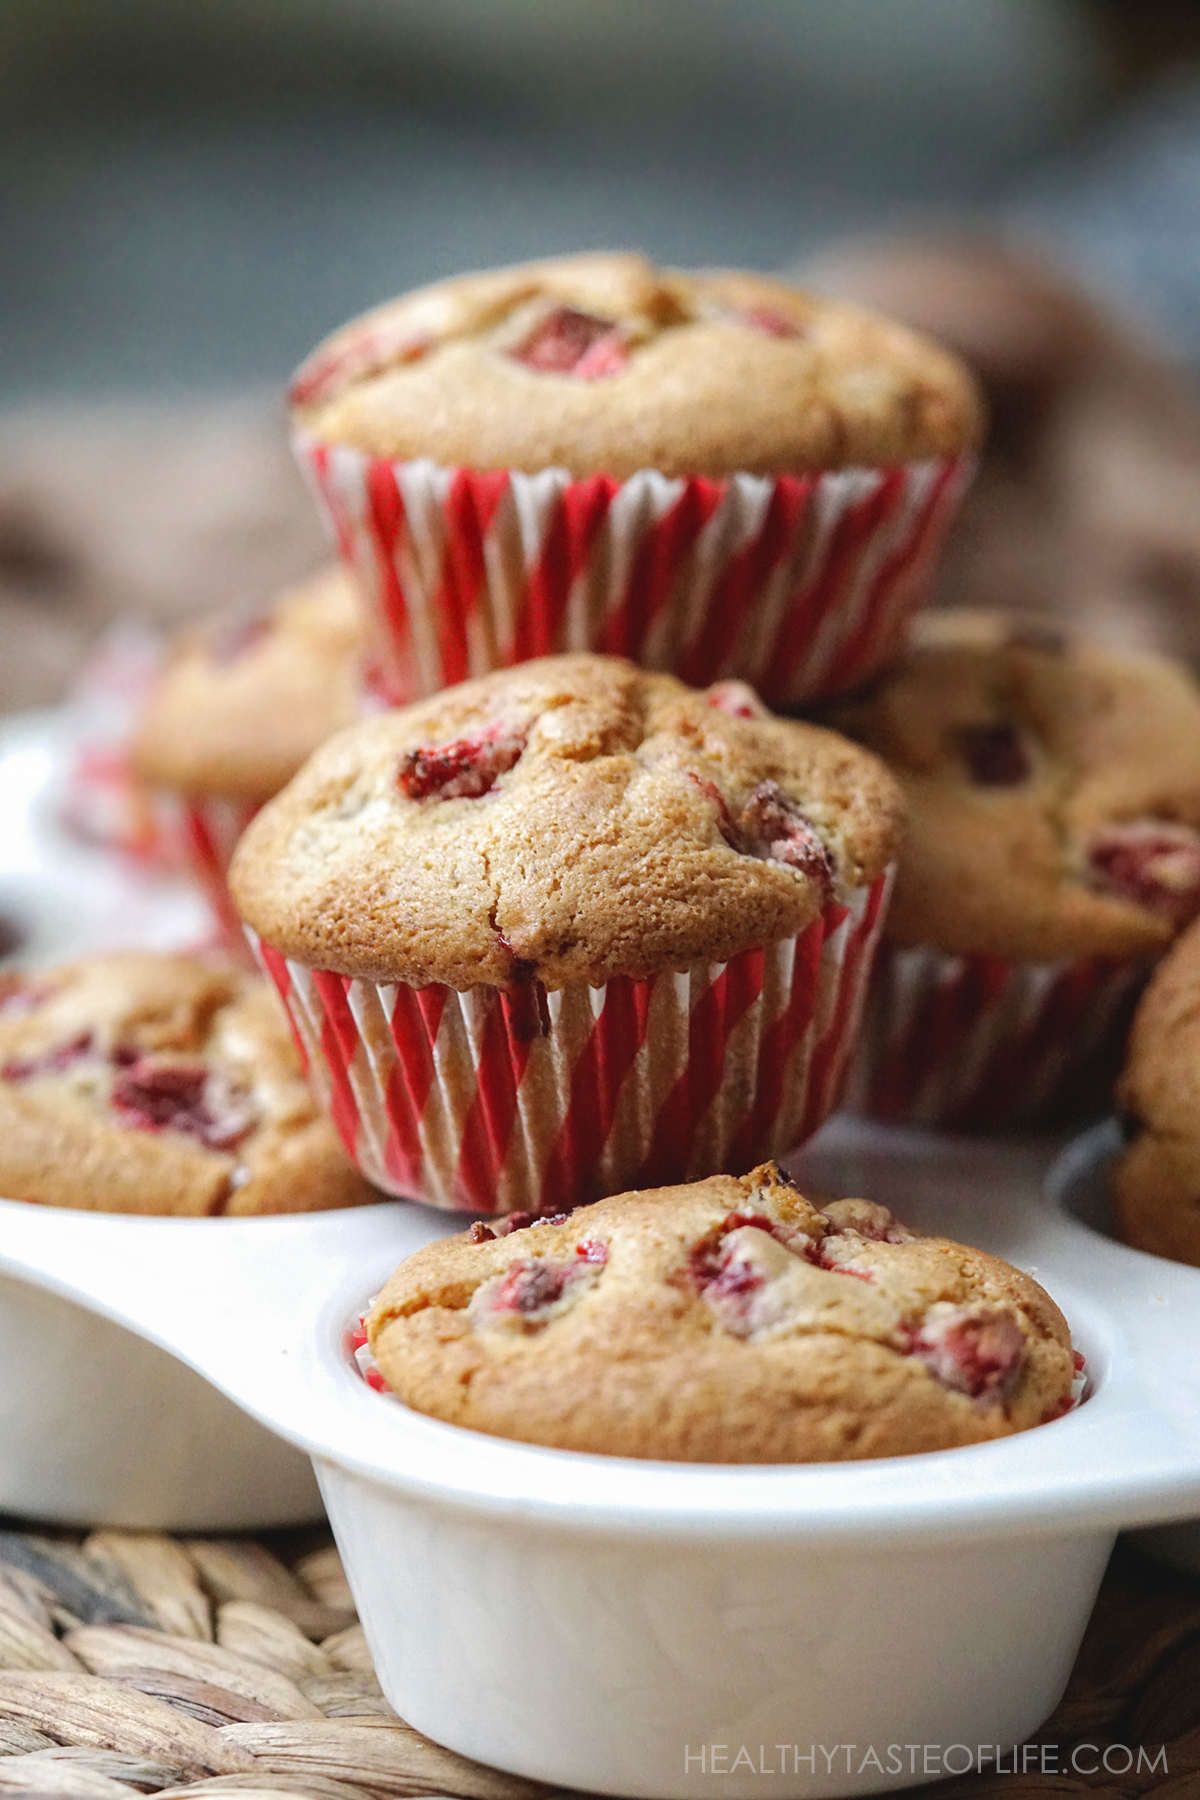 Gluten Free strawberry muffins recipe stacked on each other.